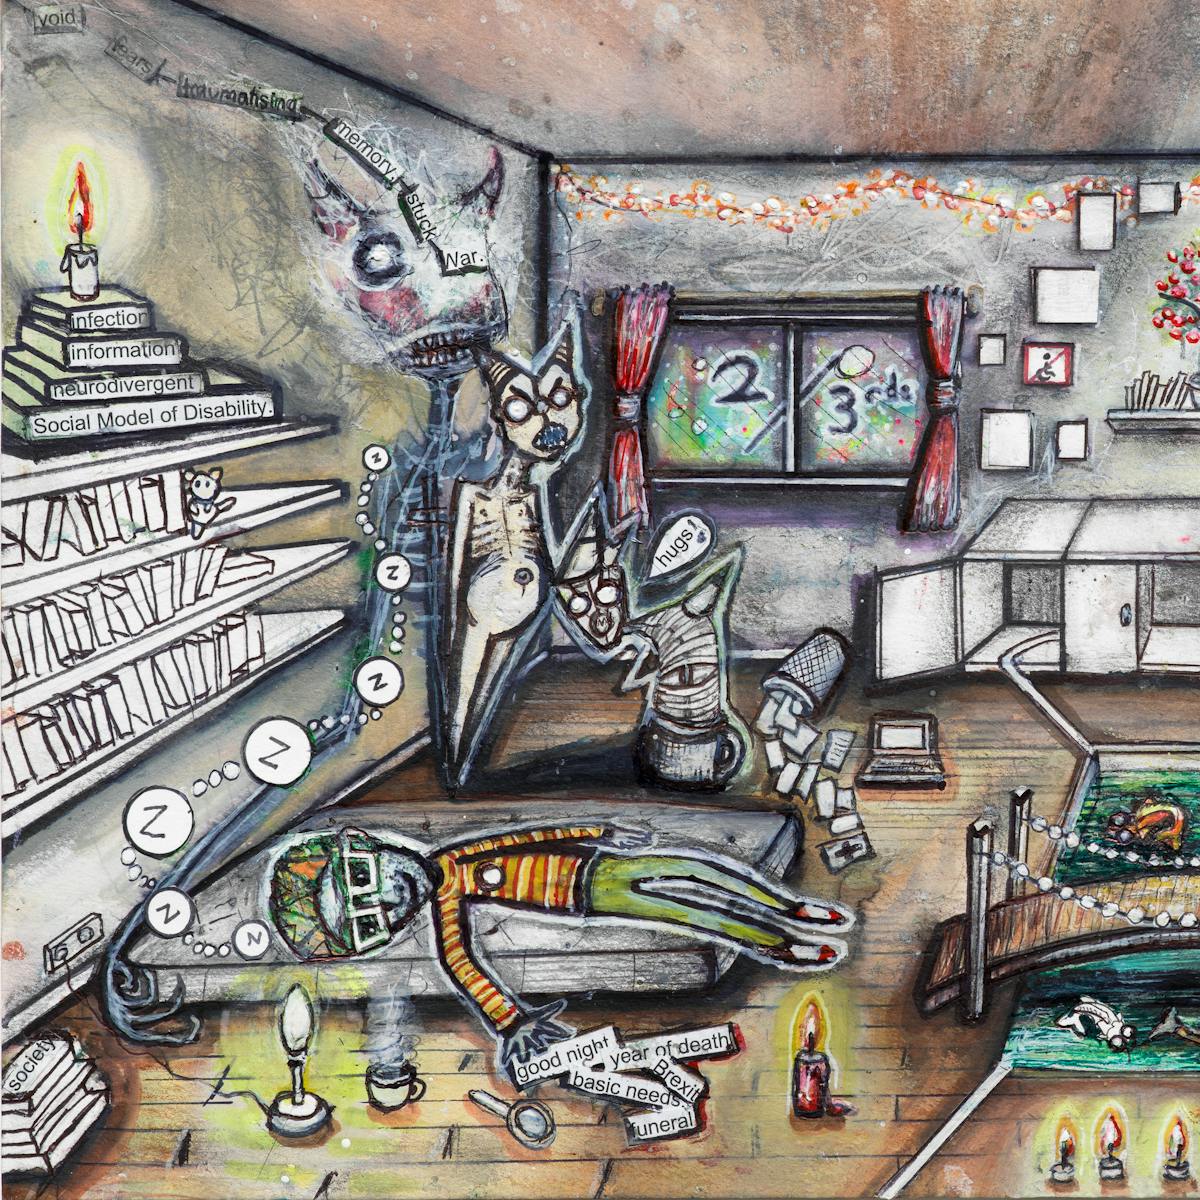 Artwork using watercolour and ink incorporating collaged words throughout the scene. The artwork shows a busy household room divided down the middle by a white line drawn across the floor.  Around the room are candles, and books with titles such as ‘social model of disability’, and ‘neurodivergent’. The right hand side of the room is multi-coloured and the wall is covered in words such as ‘vulnerable’, and ‘disabled’. The word ‘only’ is circled. In front of the coloured wall, three small people are sitting besides lowered areas in the floorboards with water features as though outside. One contains the words ‘PPE’, ‘allies’, and ‘austerity’. A kitchenette with an overflowing sink, empty cupboards, a toilet and a first aid box, as well as a window with 2/3rds written across it appear in the background. The left hand side of the image is less colourful. Besides a man sleeping on a mattress on the floor fully clothed, are phrases such as ‘year of death’, and ‘basic needs’. Besides him are three ghoulish creatures, one with a speech bubble with the word ‘hugs’ and an exclamation mark.